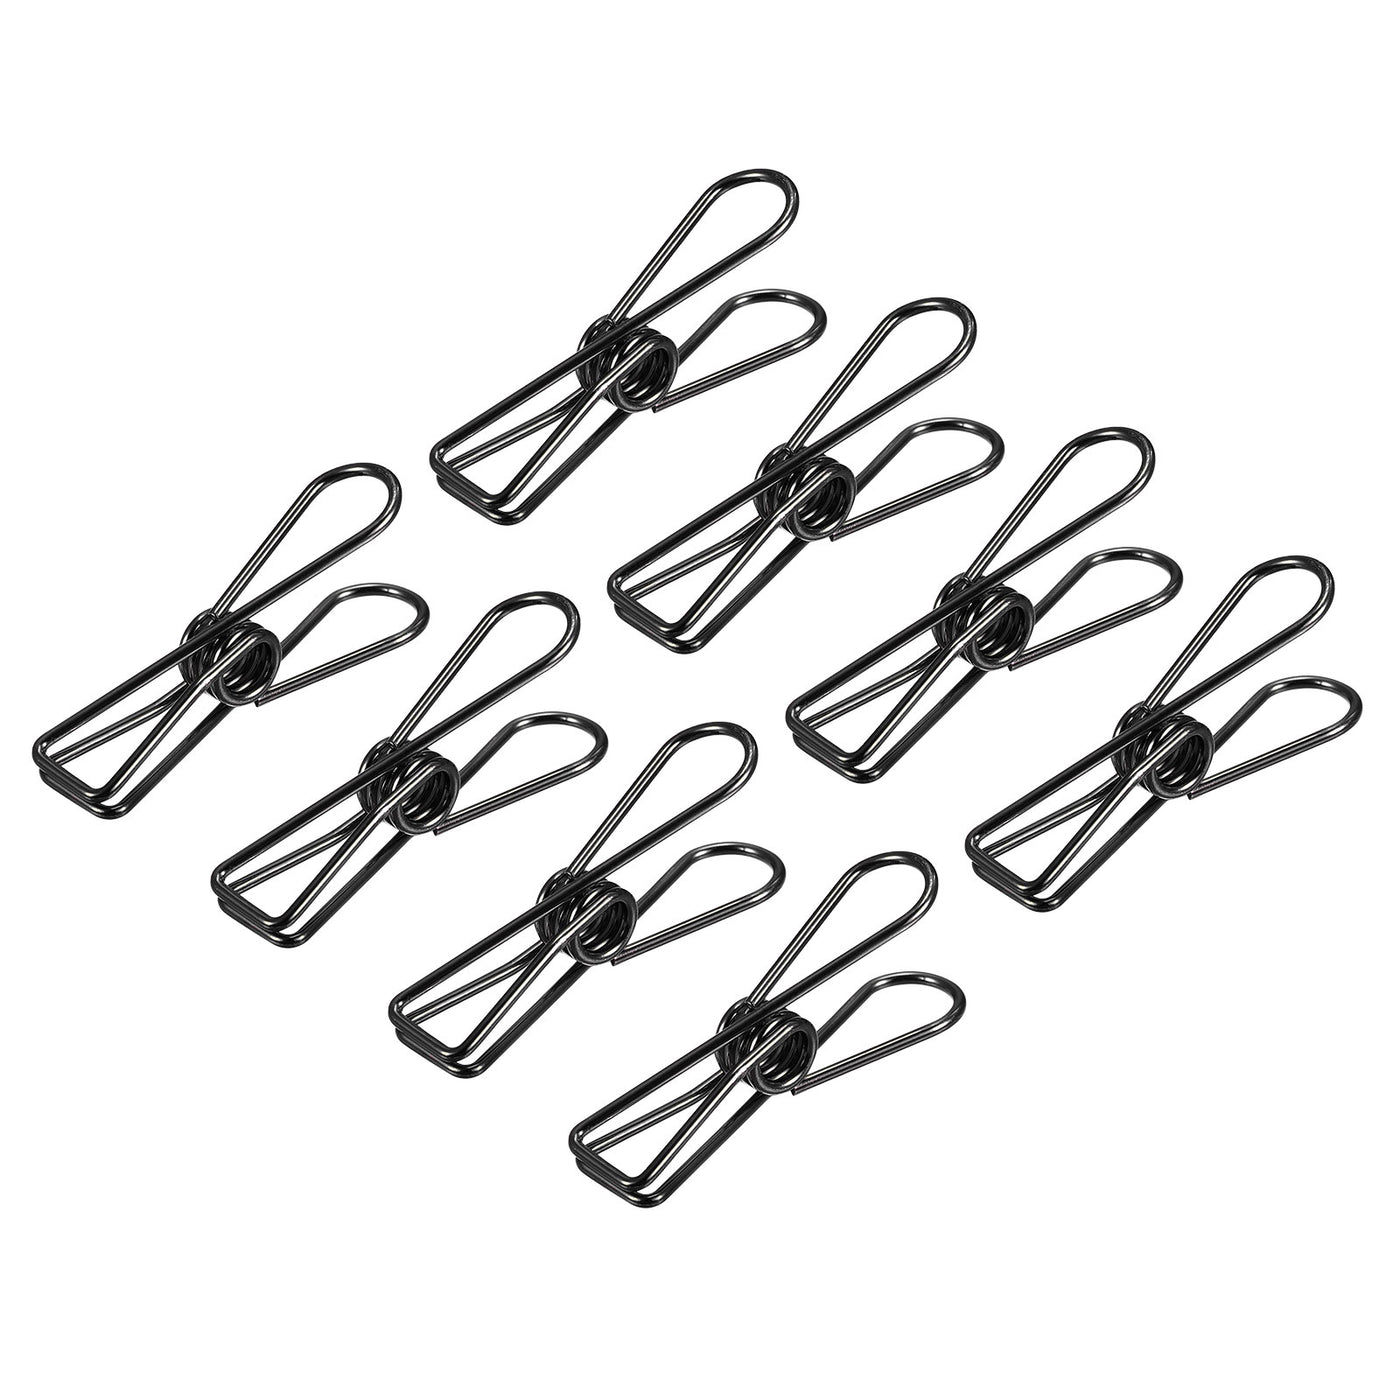 uxcell Uxcell Tablecloth Clips, 32mm Carbon Steel Clamps for Fixing Table Cloth, Black 16 Pcs